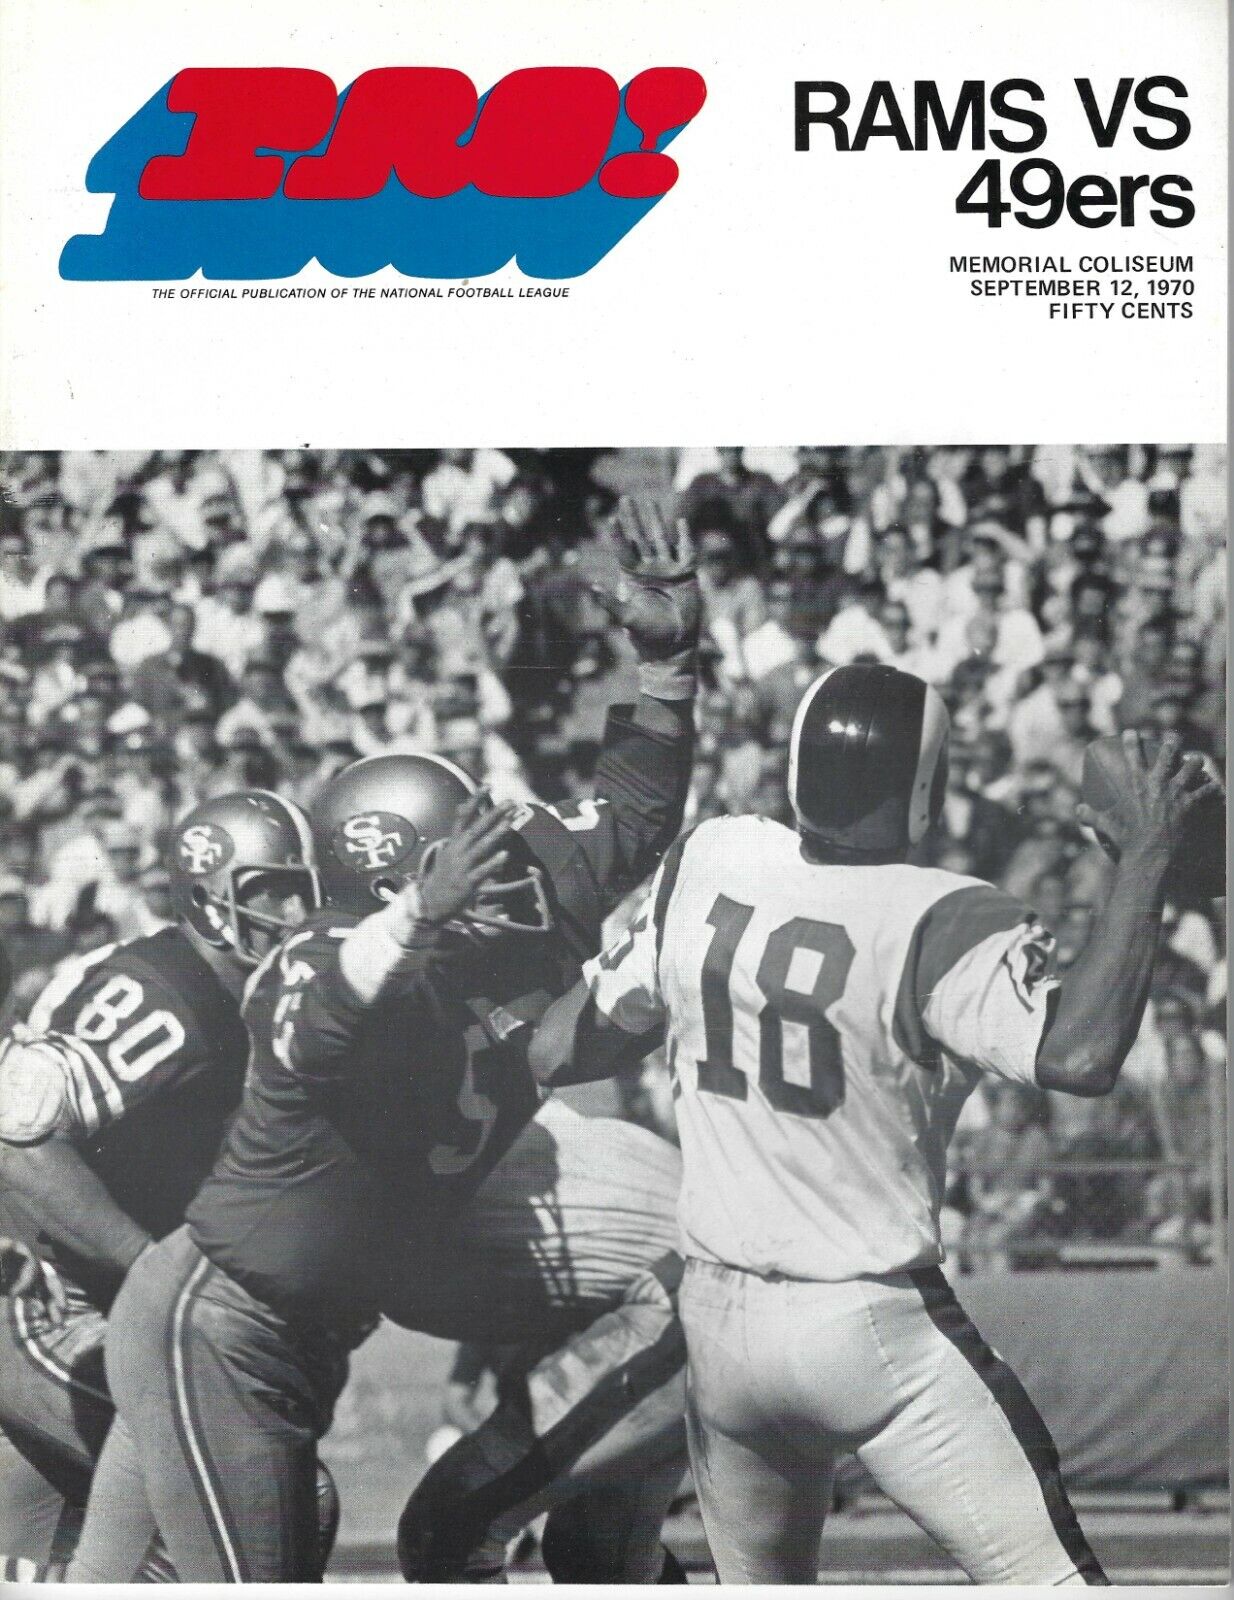 1970 9 Limited Special Price 12 football program Los Francisco Max 55% OFF 49ers San Rams Angeles